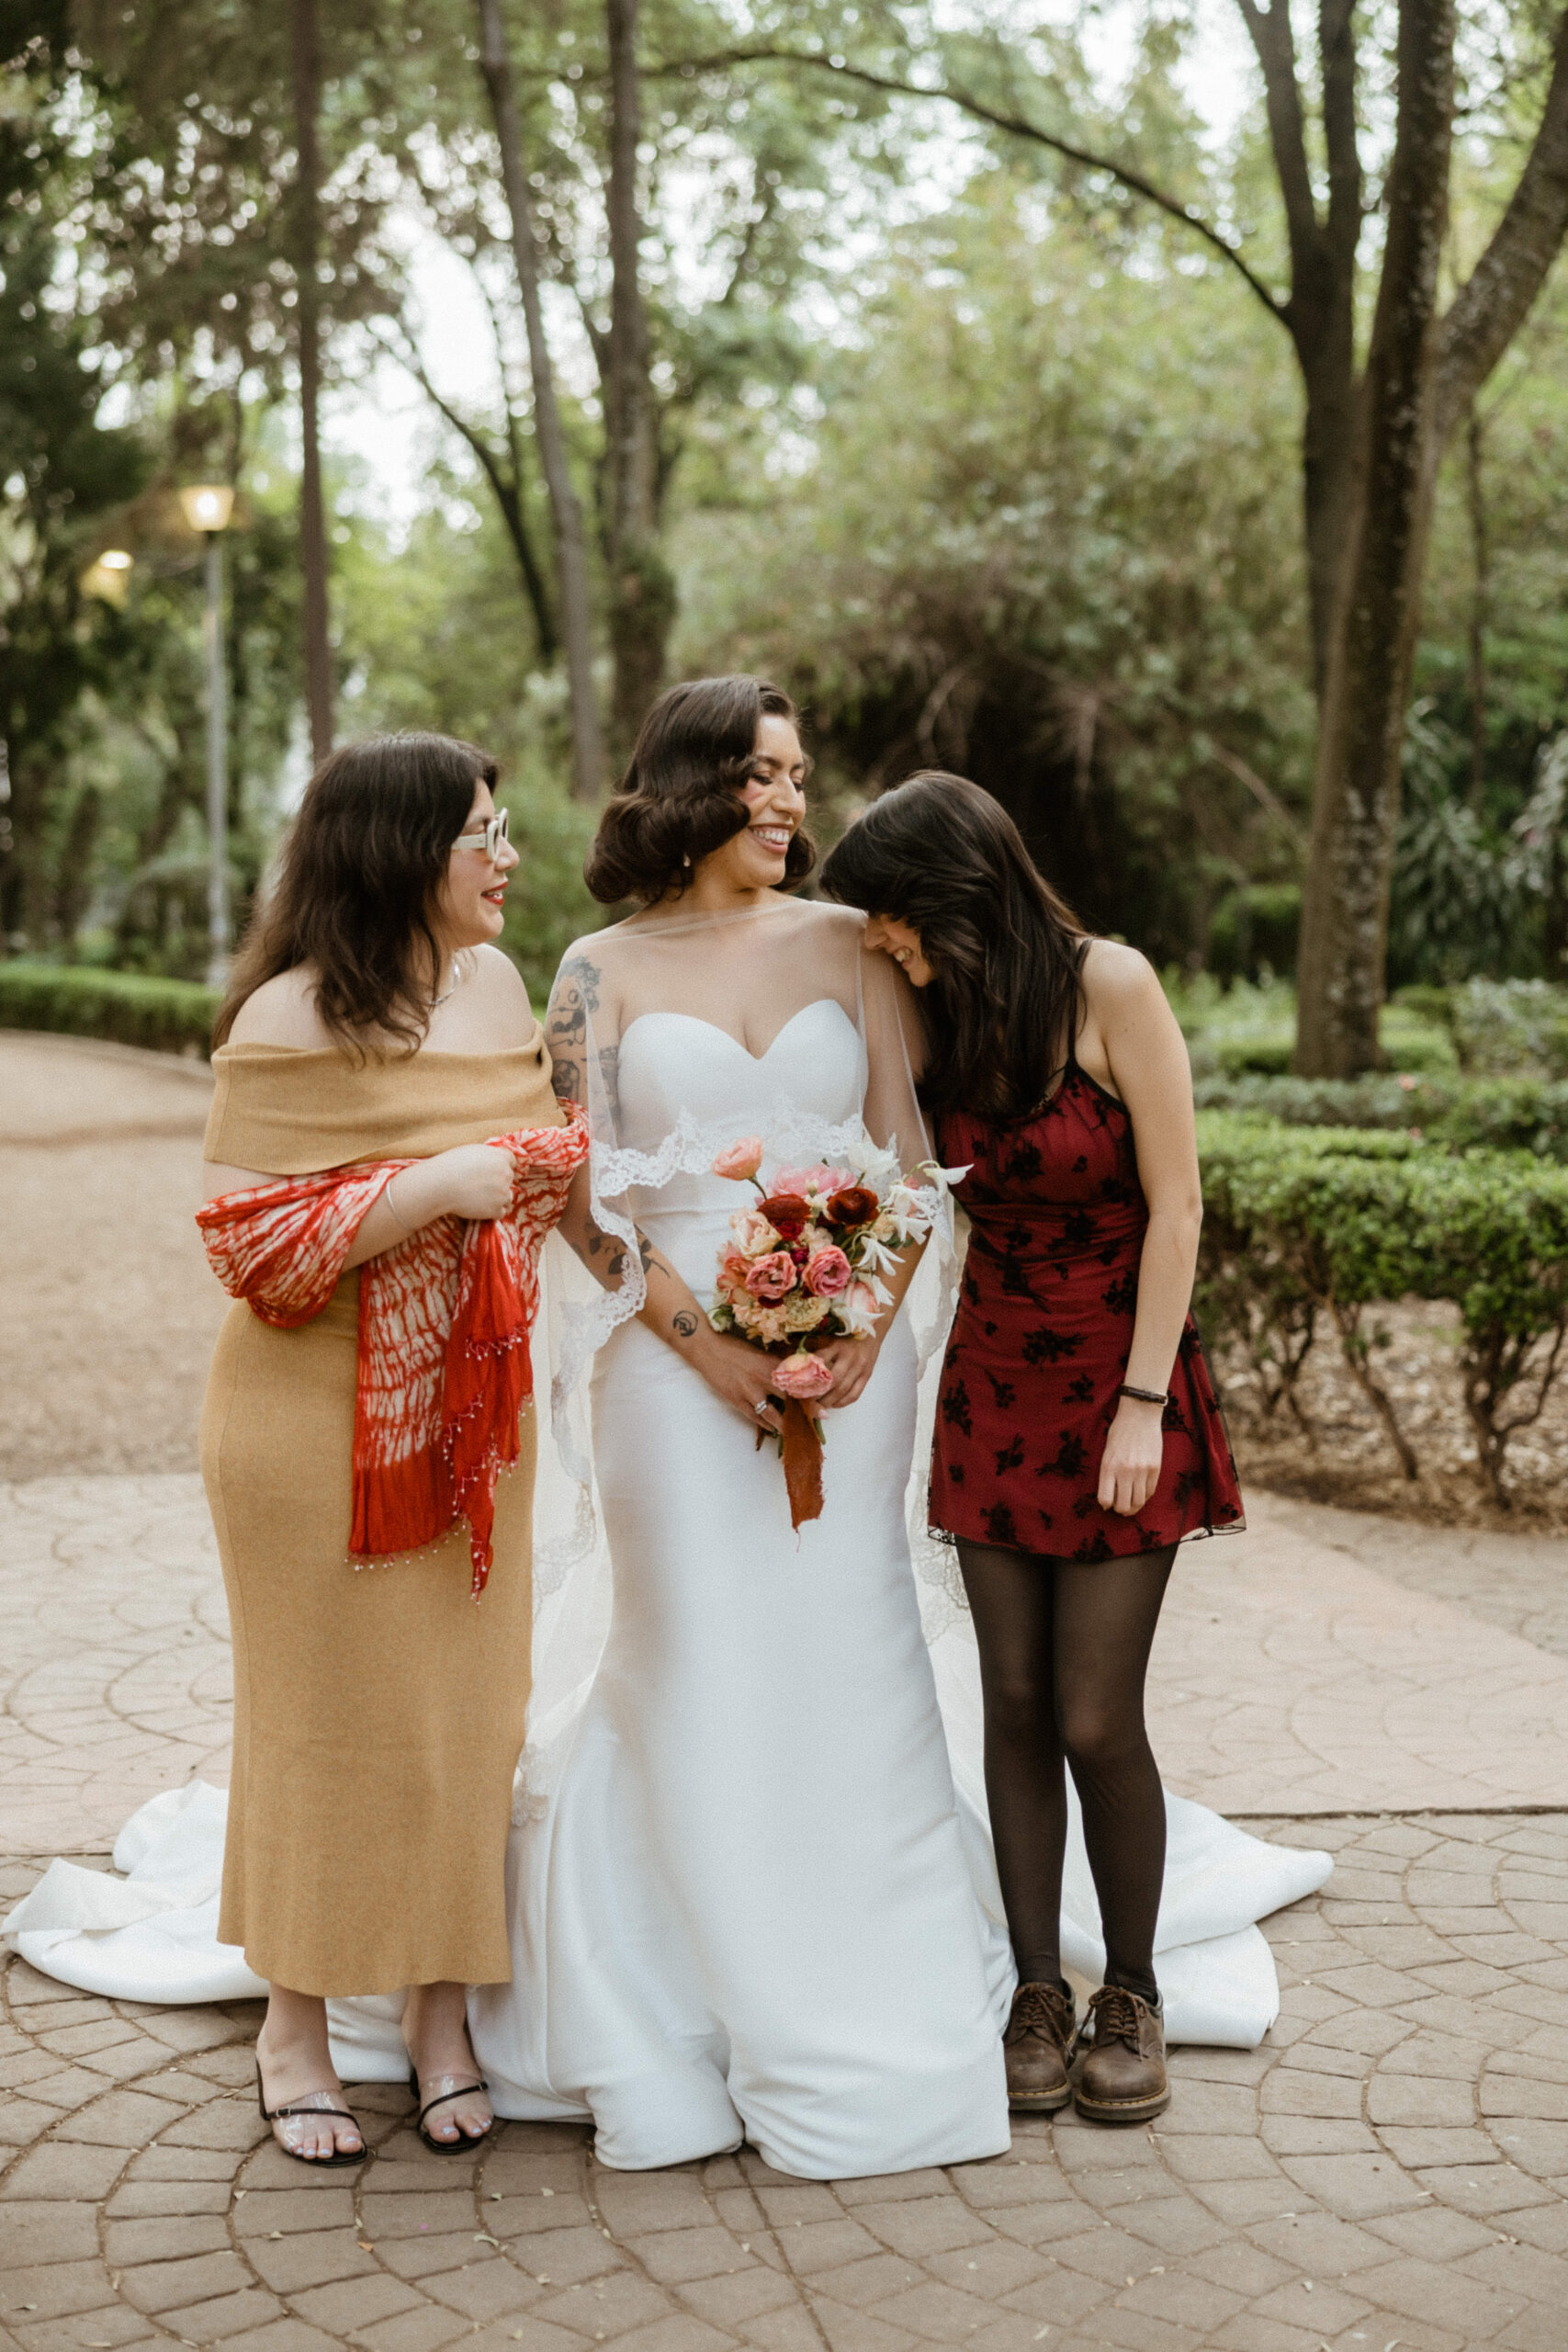 The stunning bride poses with two of her bridesmaids outside her Sobremesa wedding venue